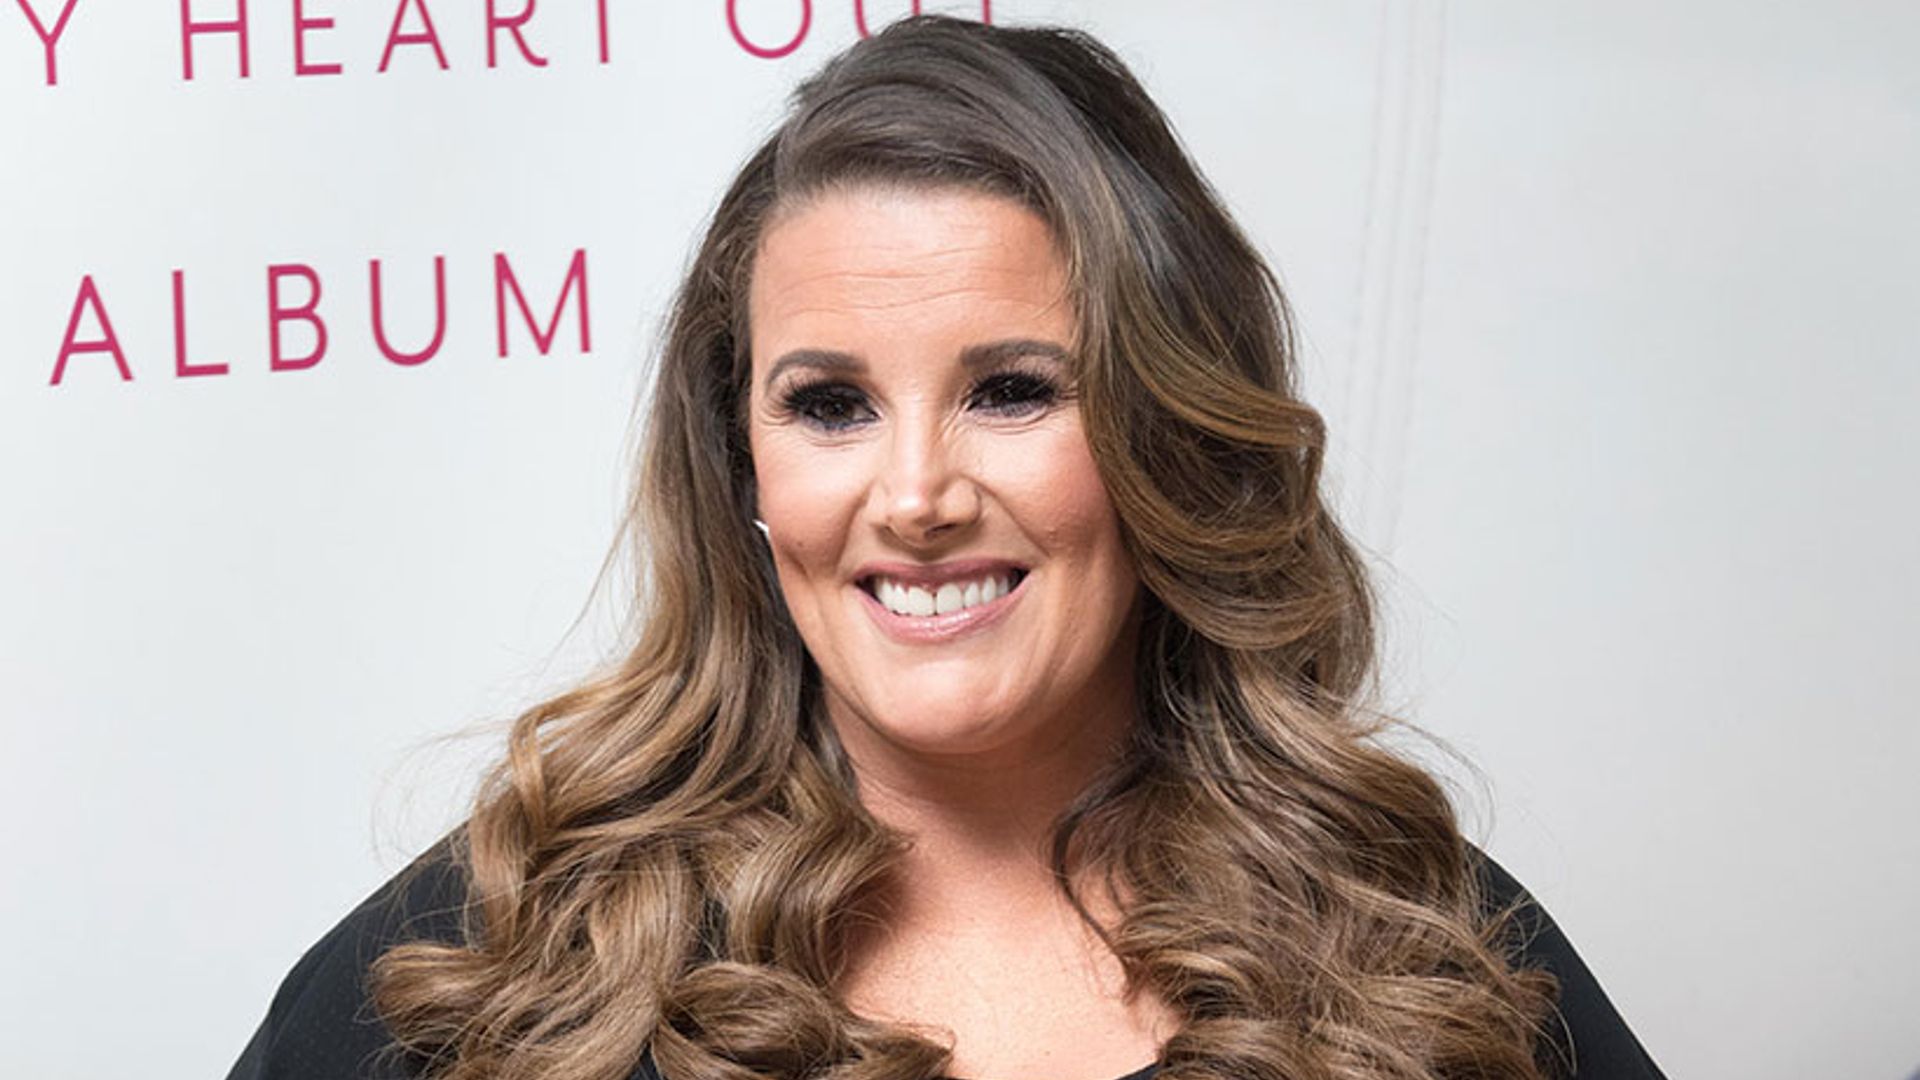 X Factor's Sam Bailey rushed to hospital after being knocked out by ladder